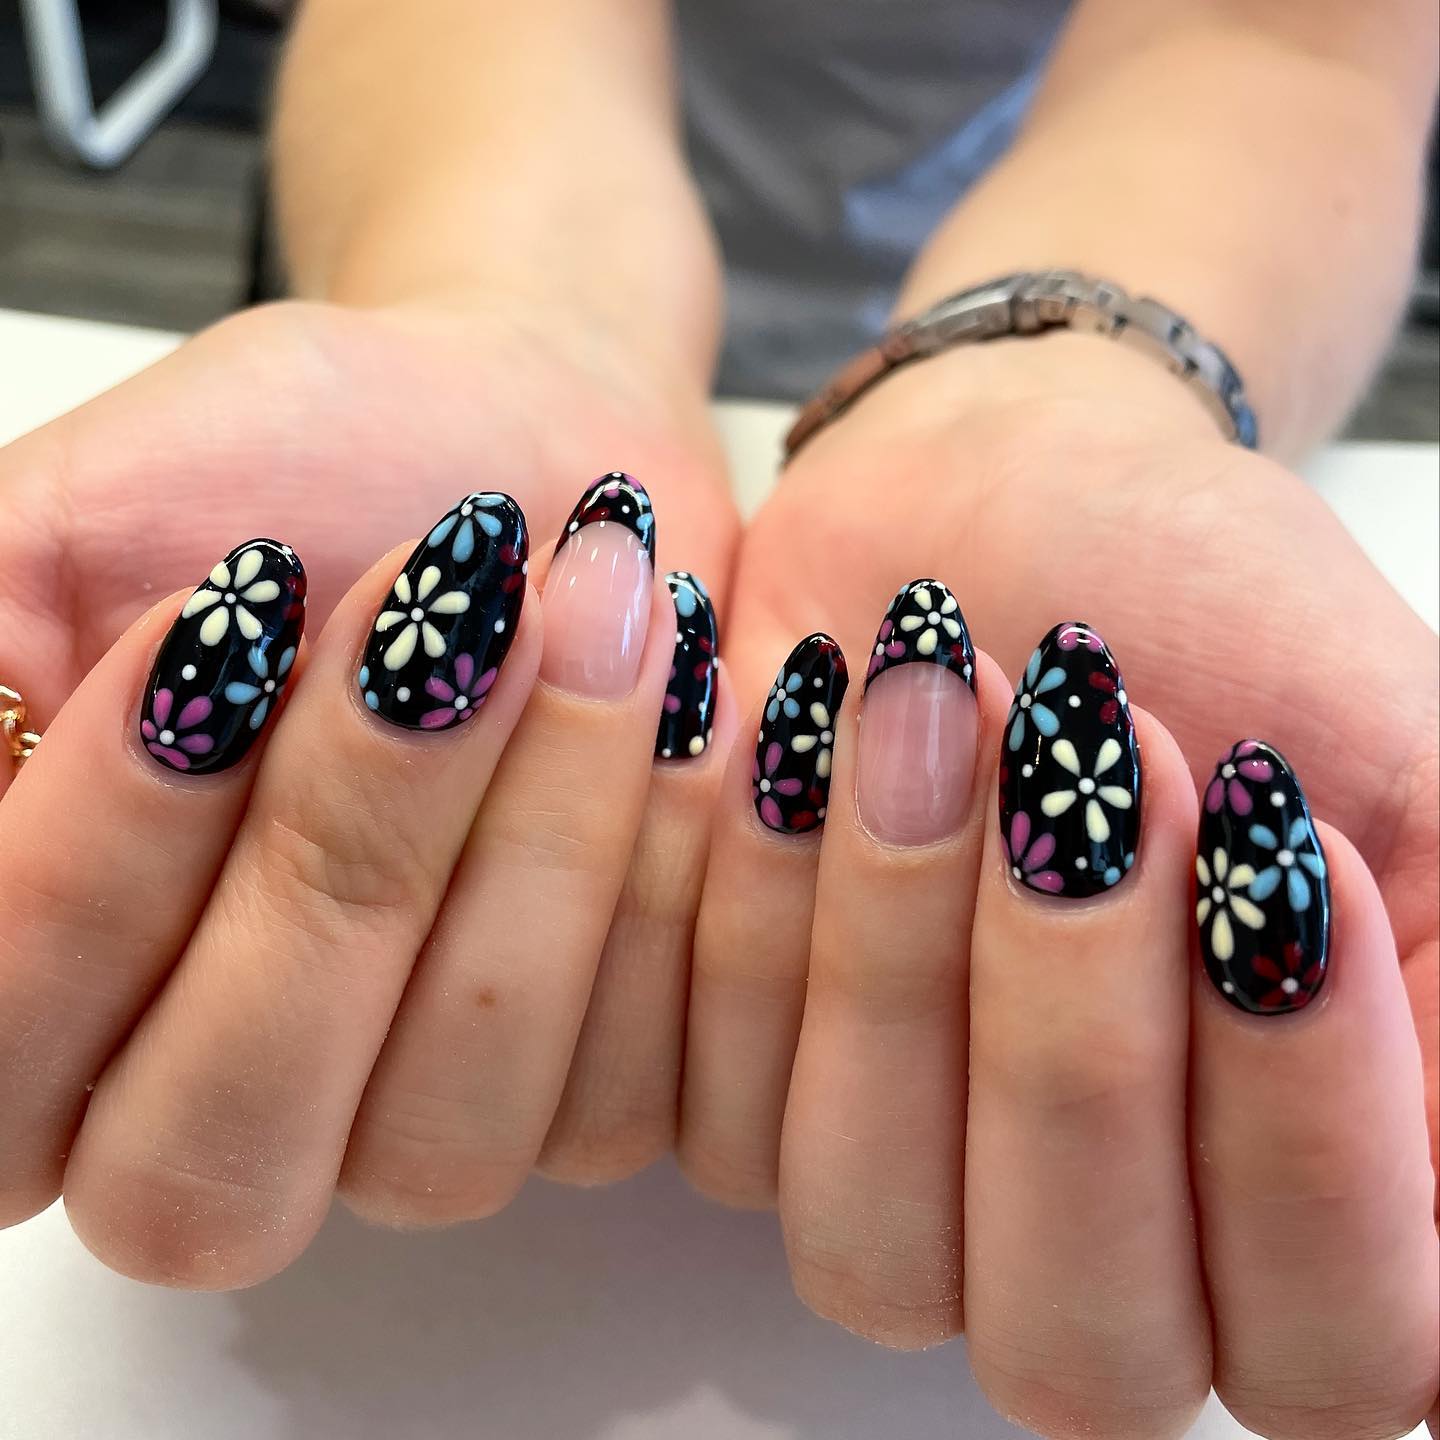 On a black nail polish, your little colorful daisies will shine out. Give it a shot if you like darker tones of nails.